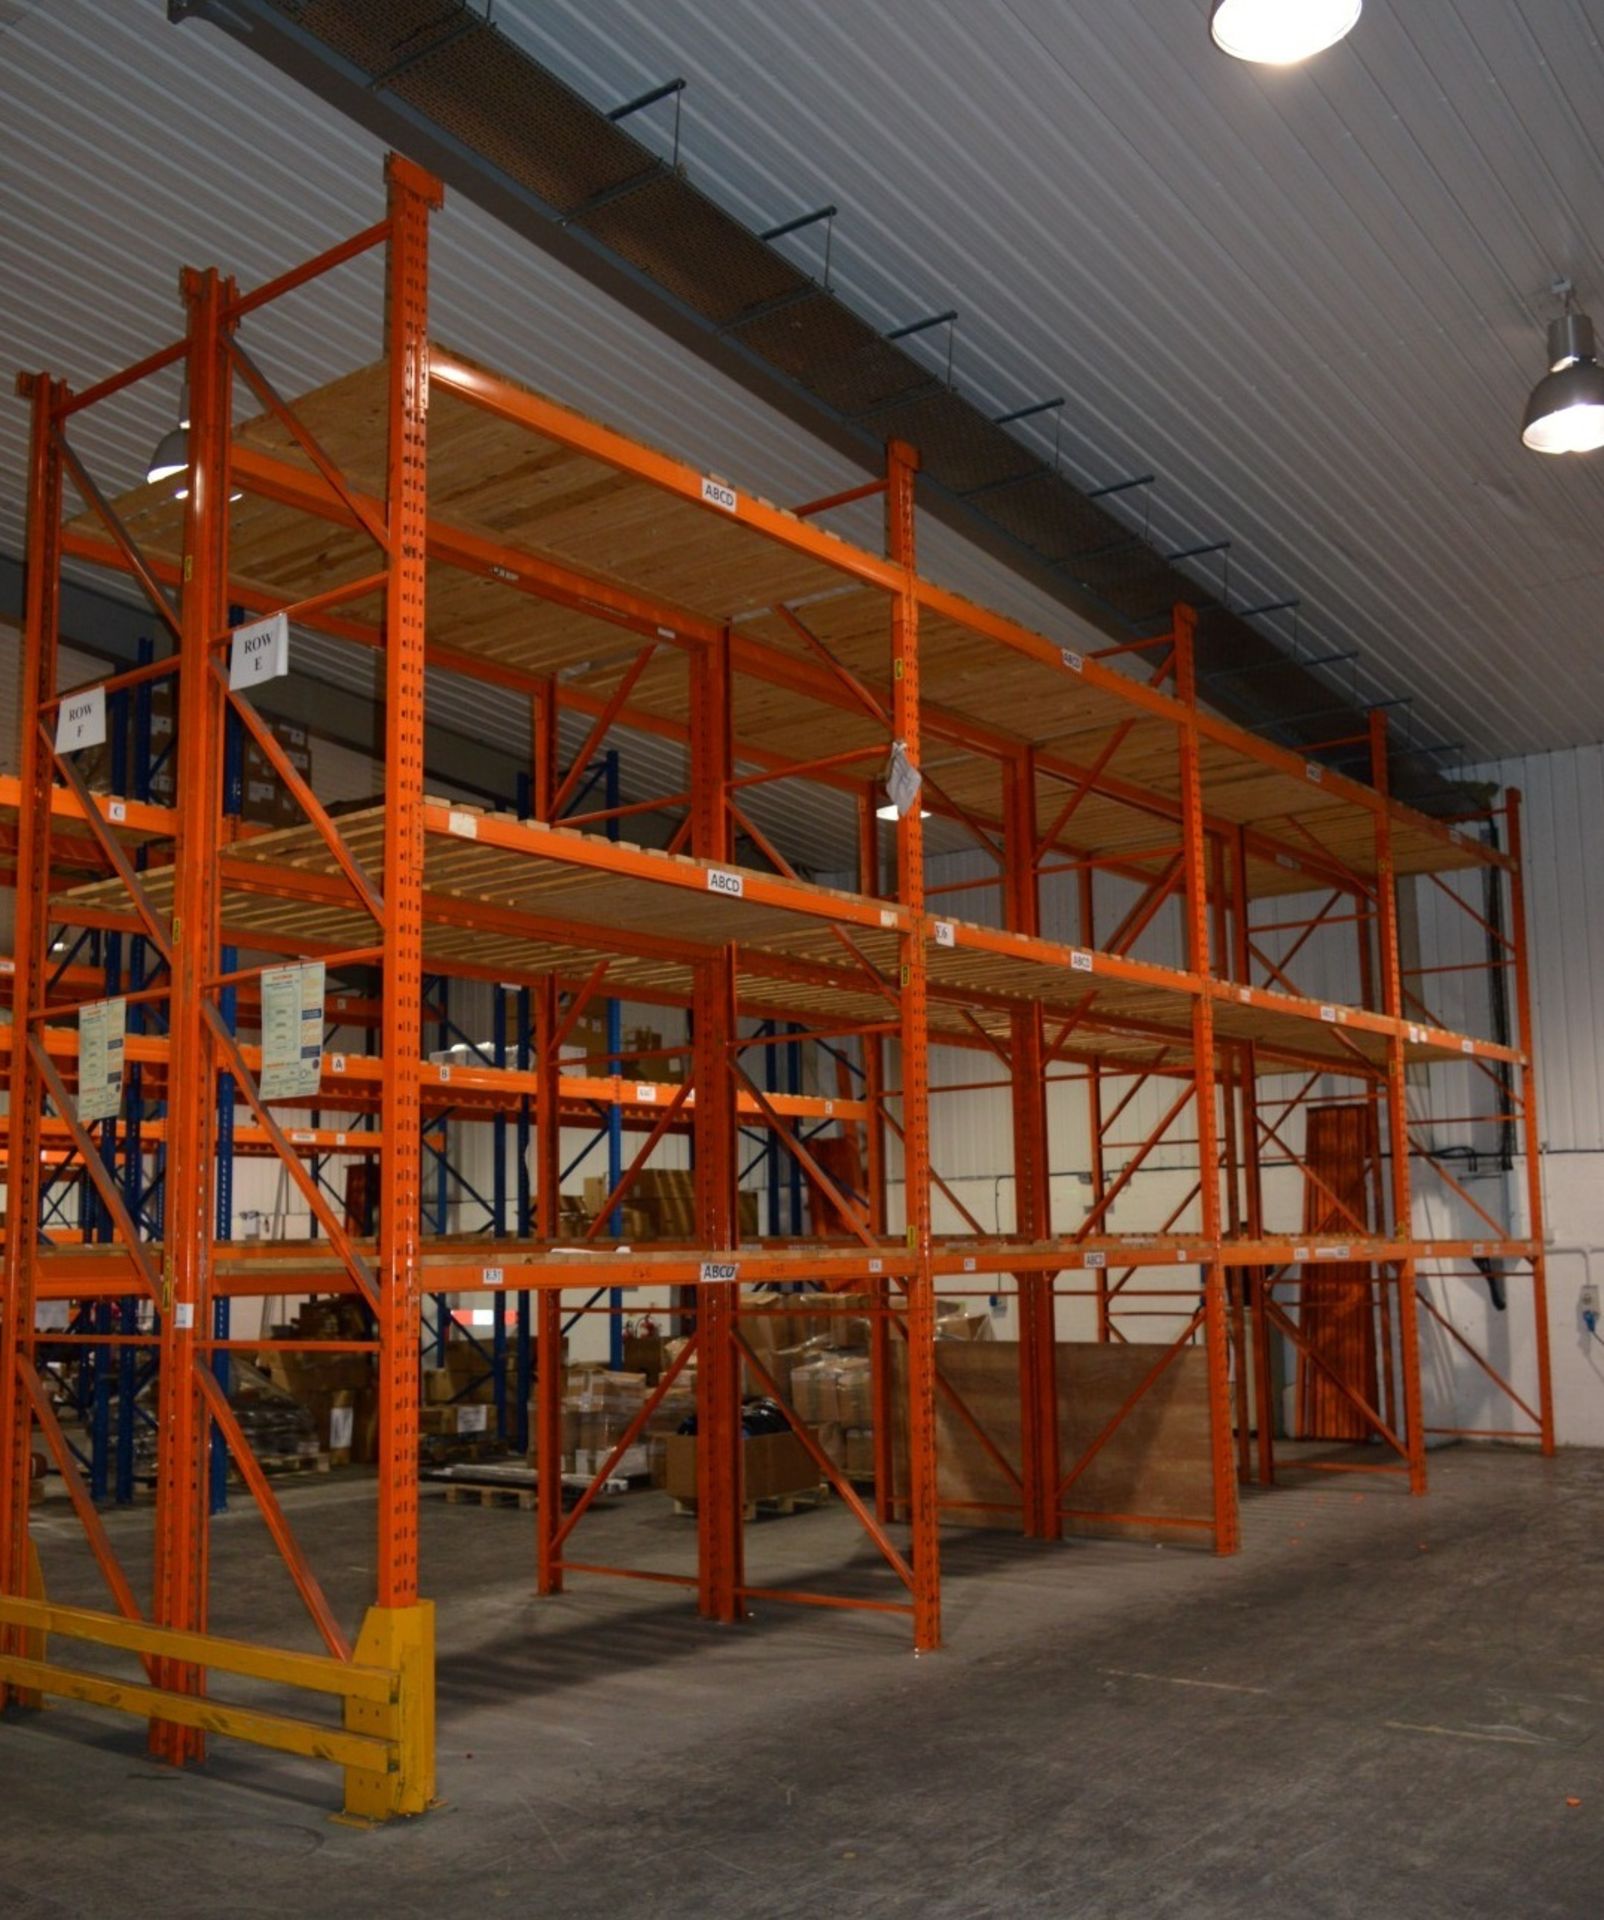 8 x Bays of Warehouse PALLET RACKING - Lot Includes 110 x Uprights, 56 x Crossbeams, 1 x - Image 6 of 9